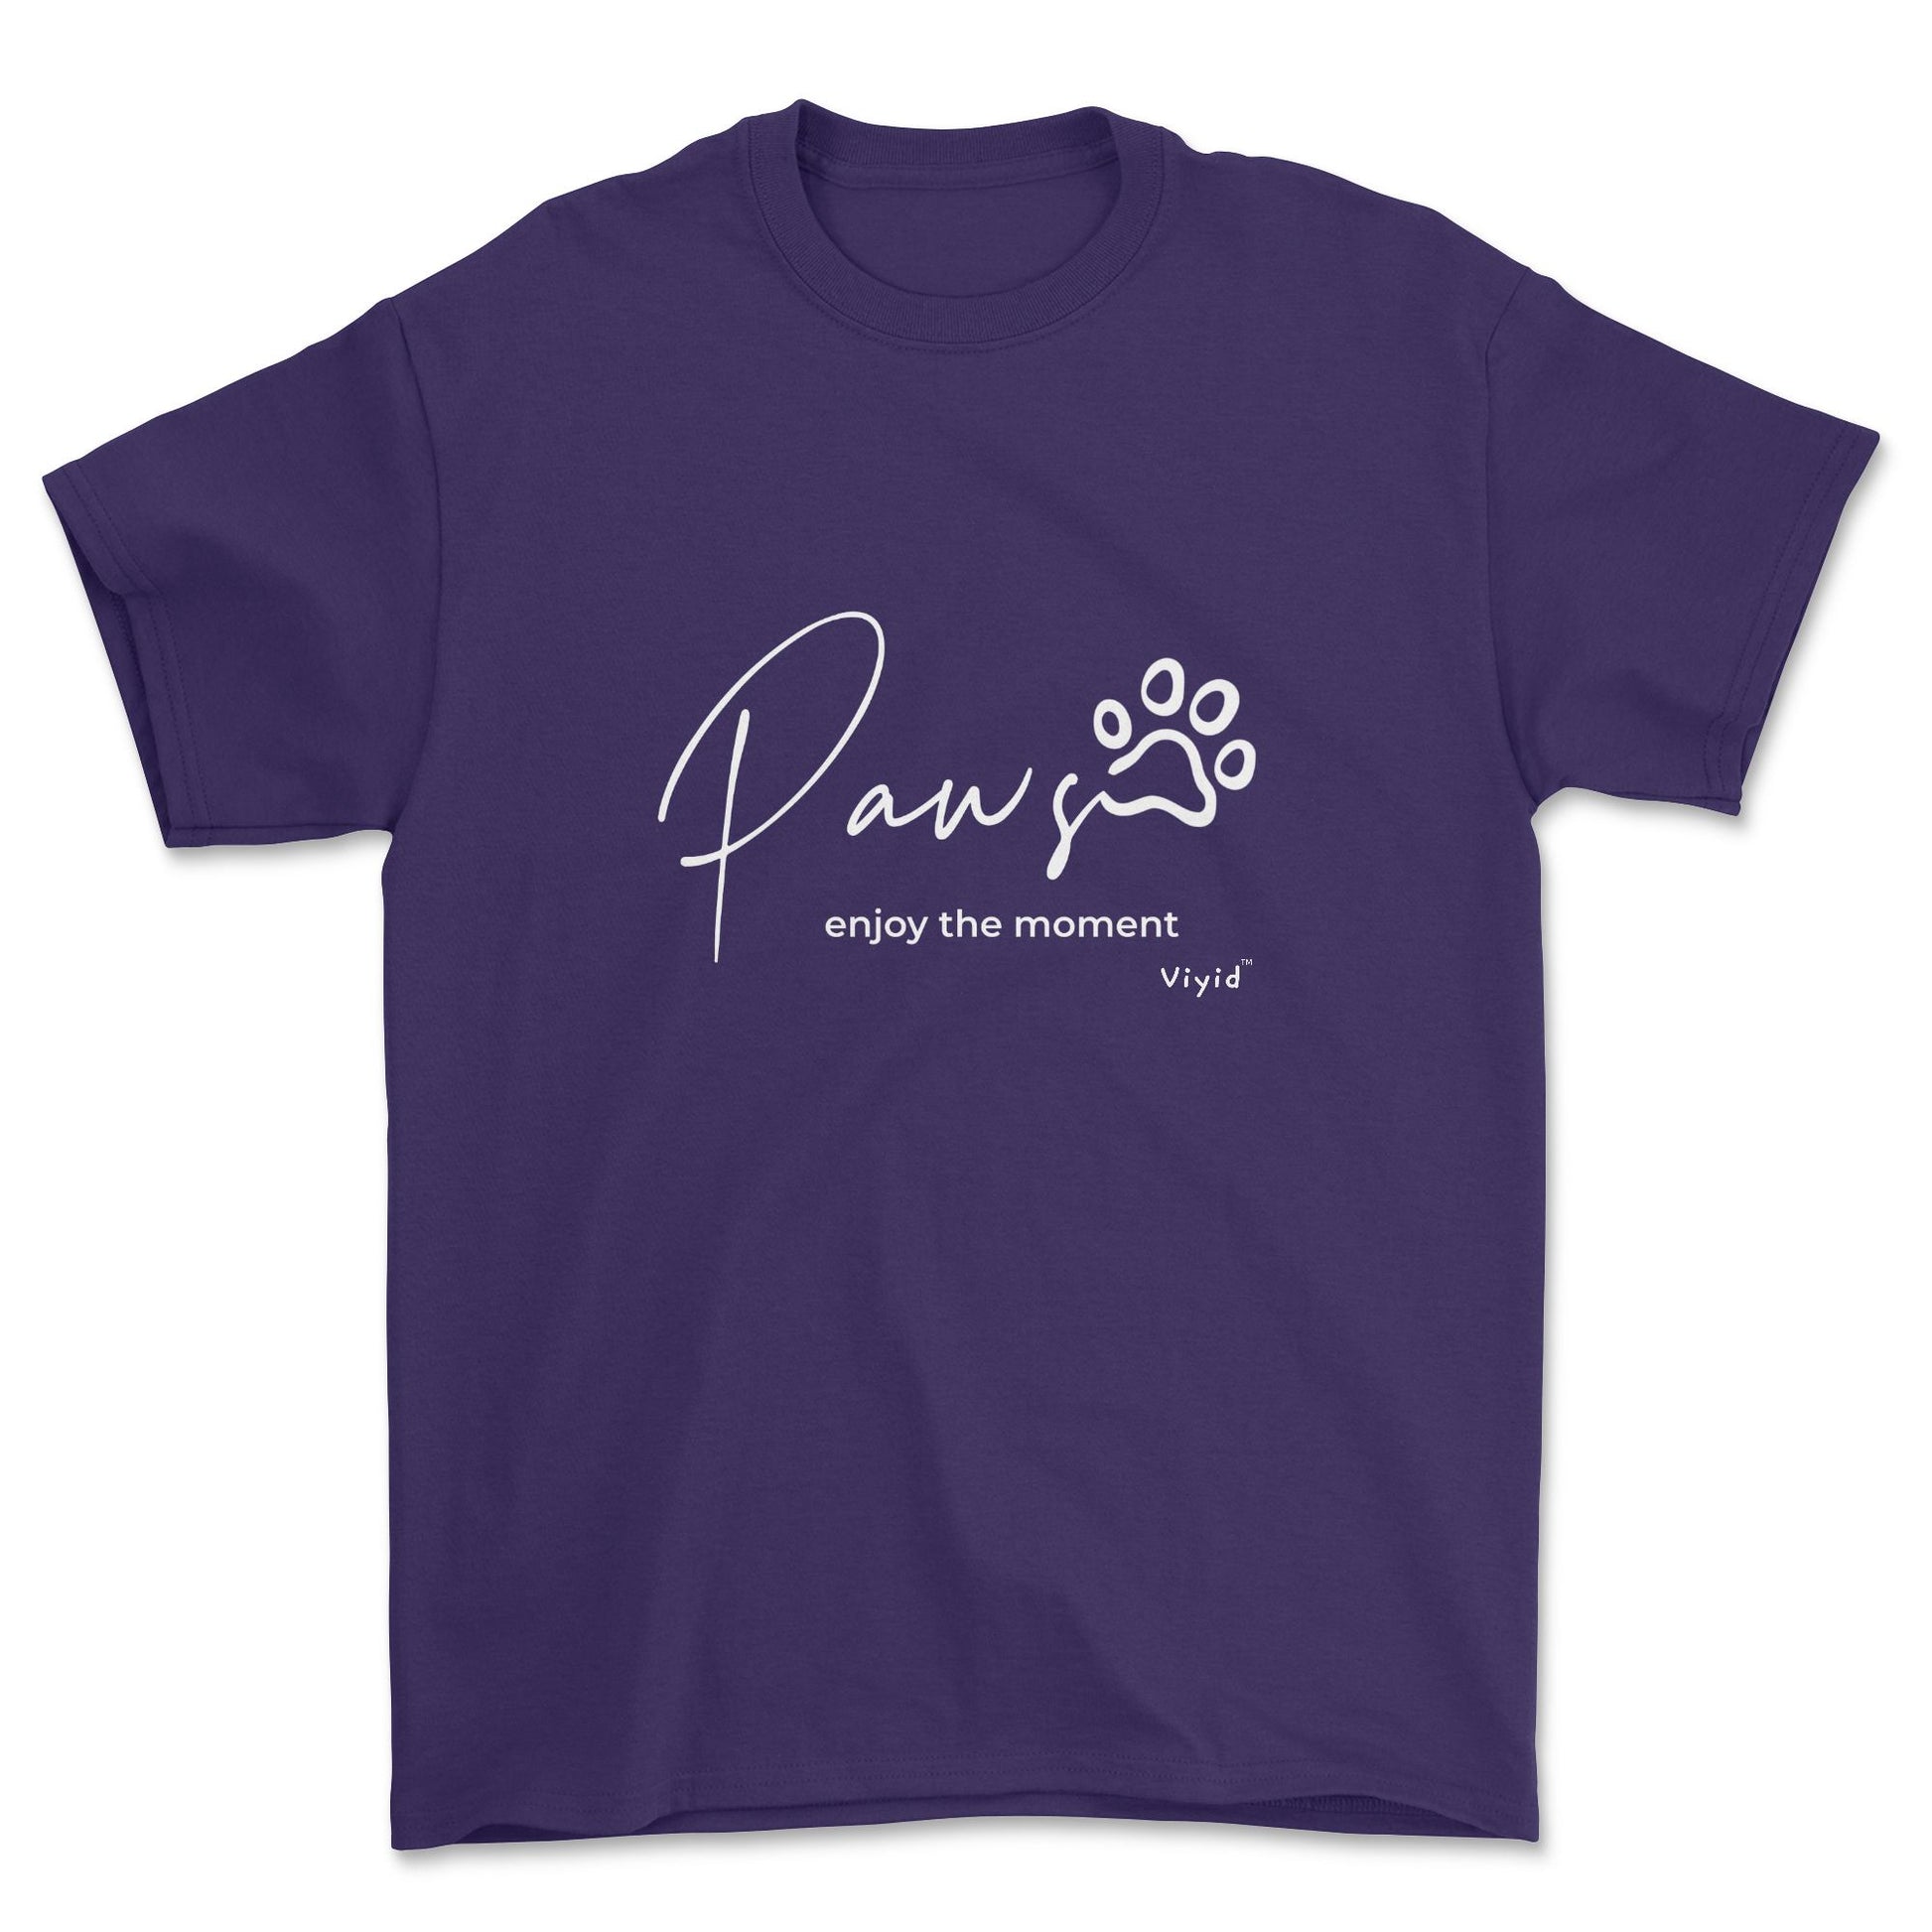 paws enjoy the moment adult t-shirt purple